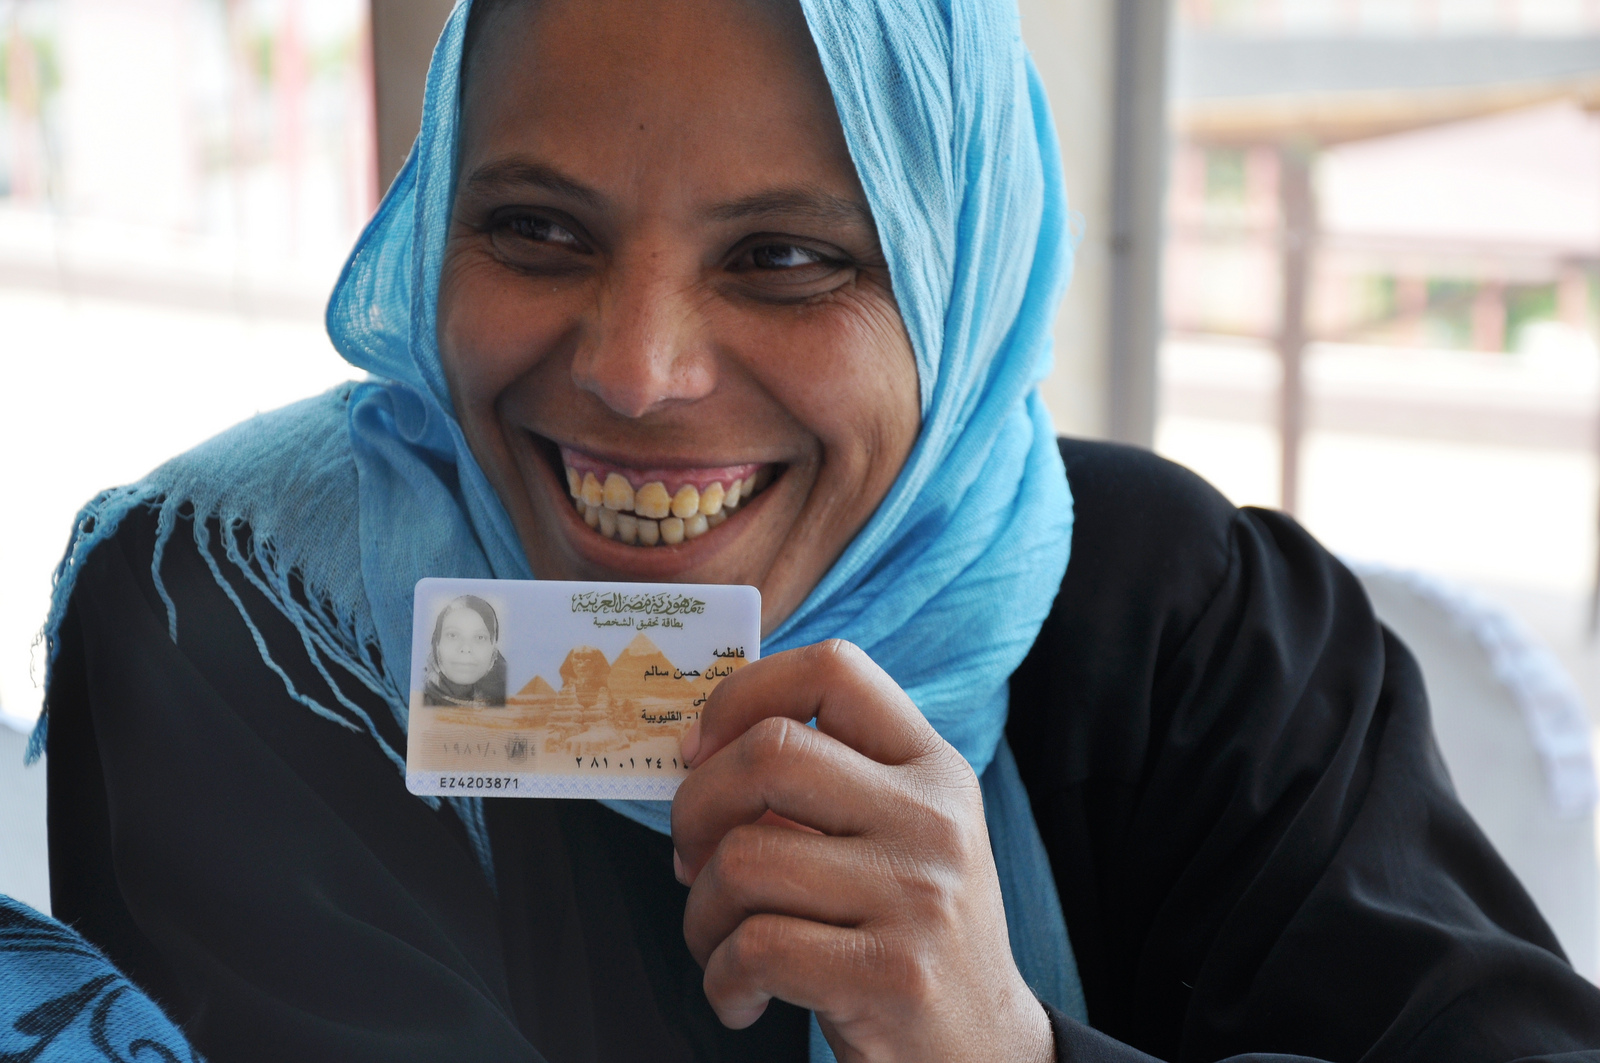 Having an official identification card is key to the rule of law. In this photo, an Egyptian woman holds her card.